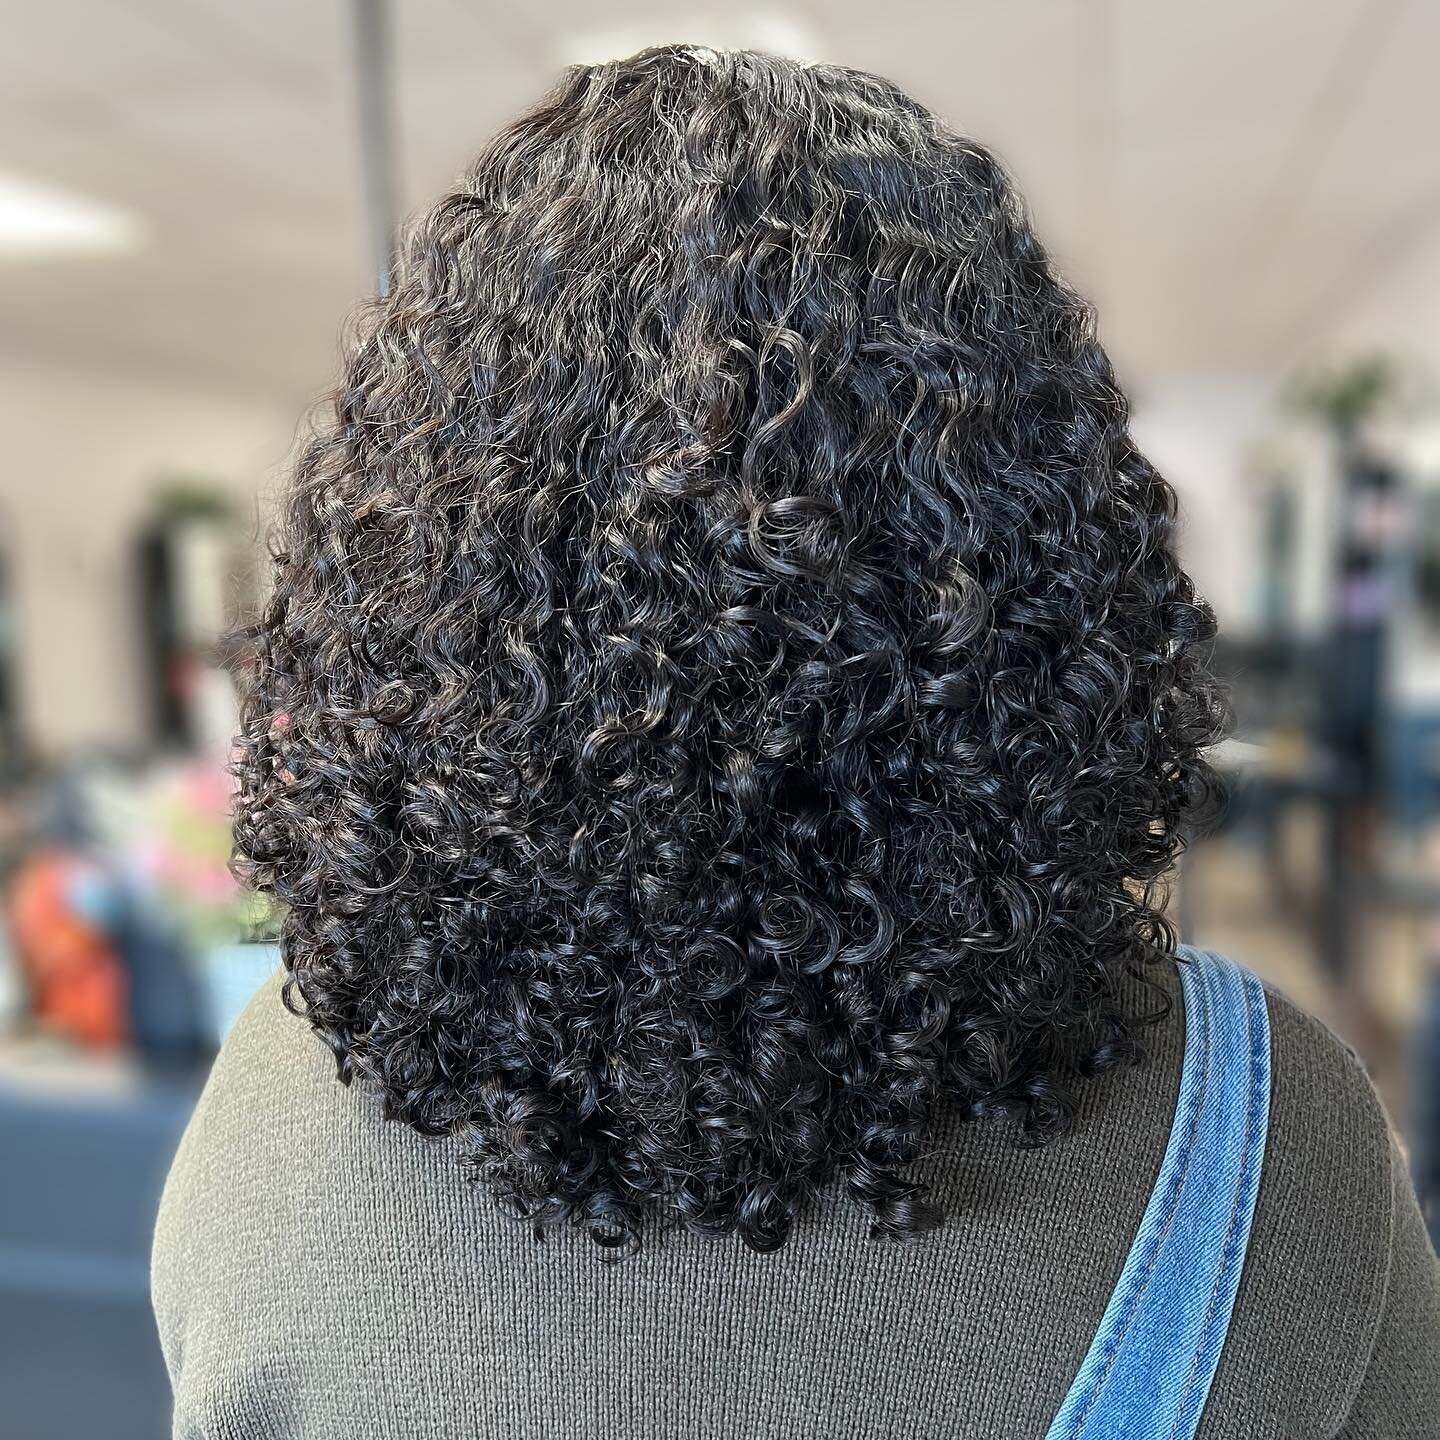 I had to share the back view of this curly cut 😘 

#curlycut #curlspecialist #behindthechair #matrixeducation #acurlcandream #modernsalon #licensedtocreate